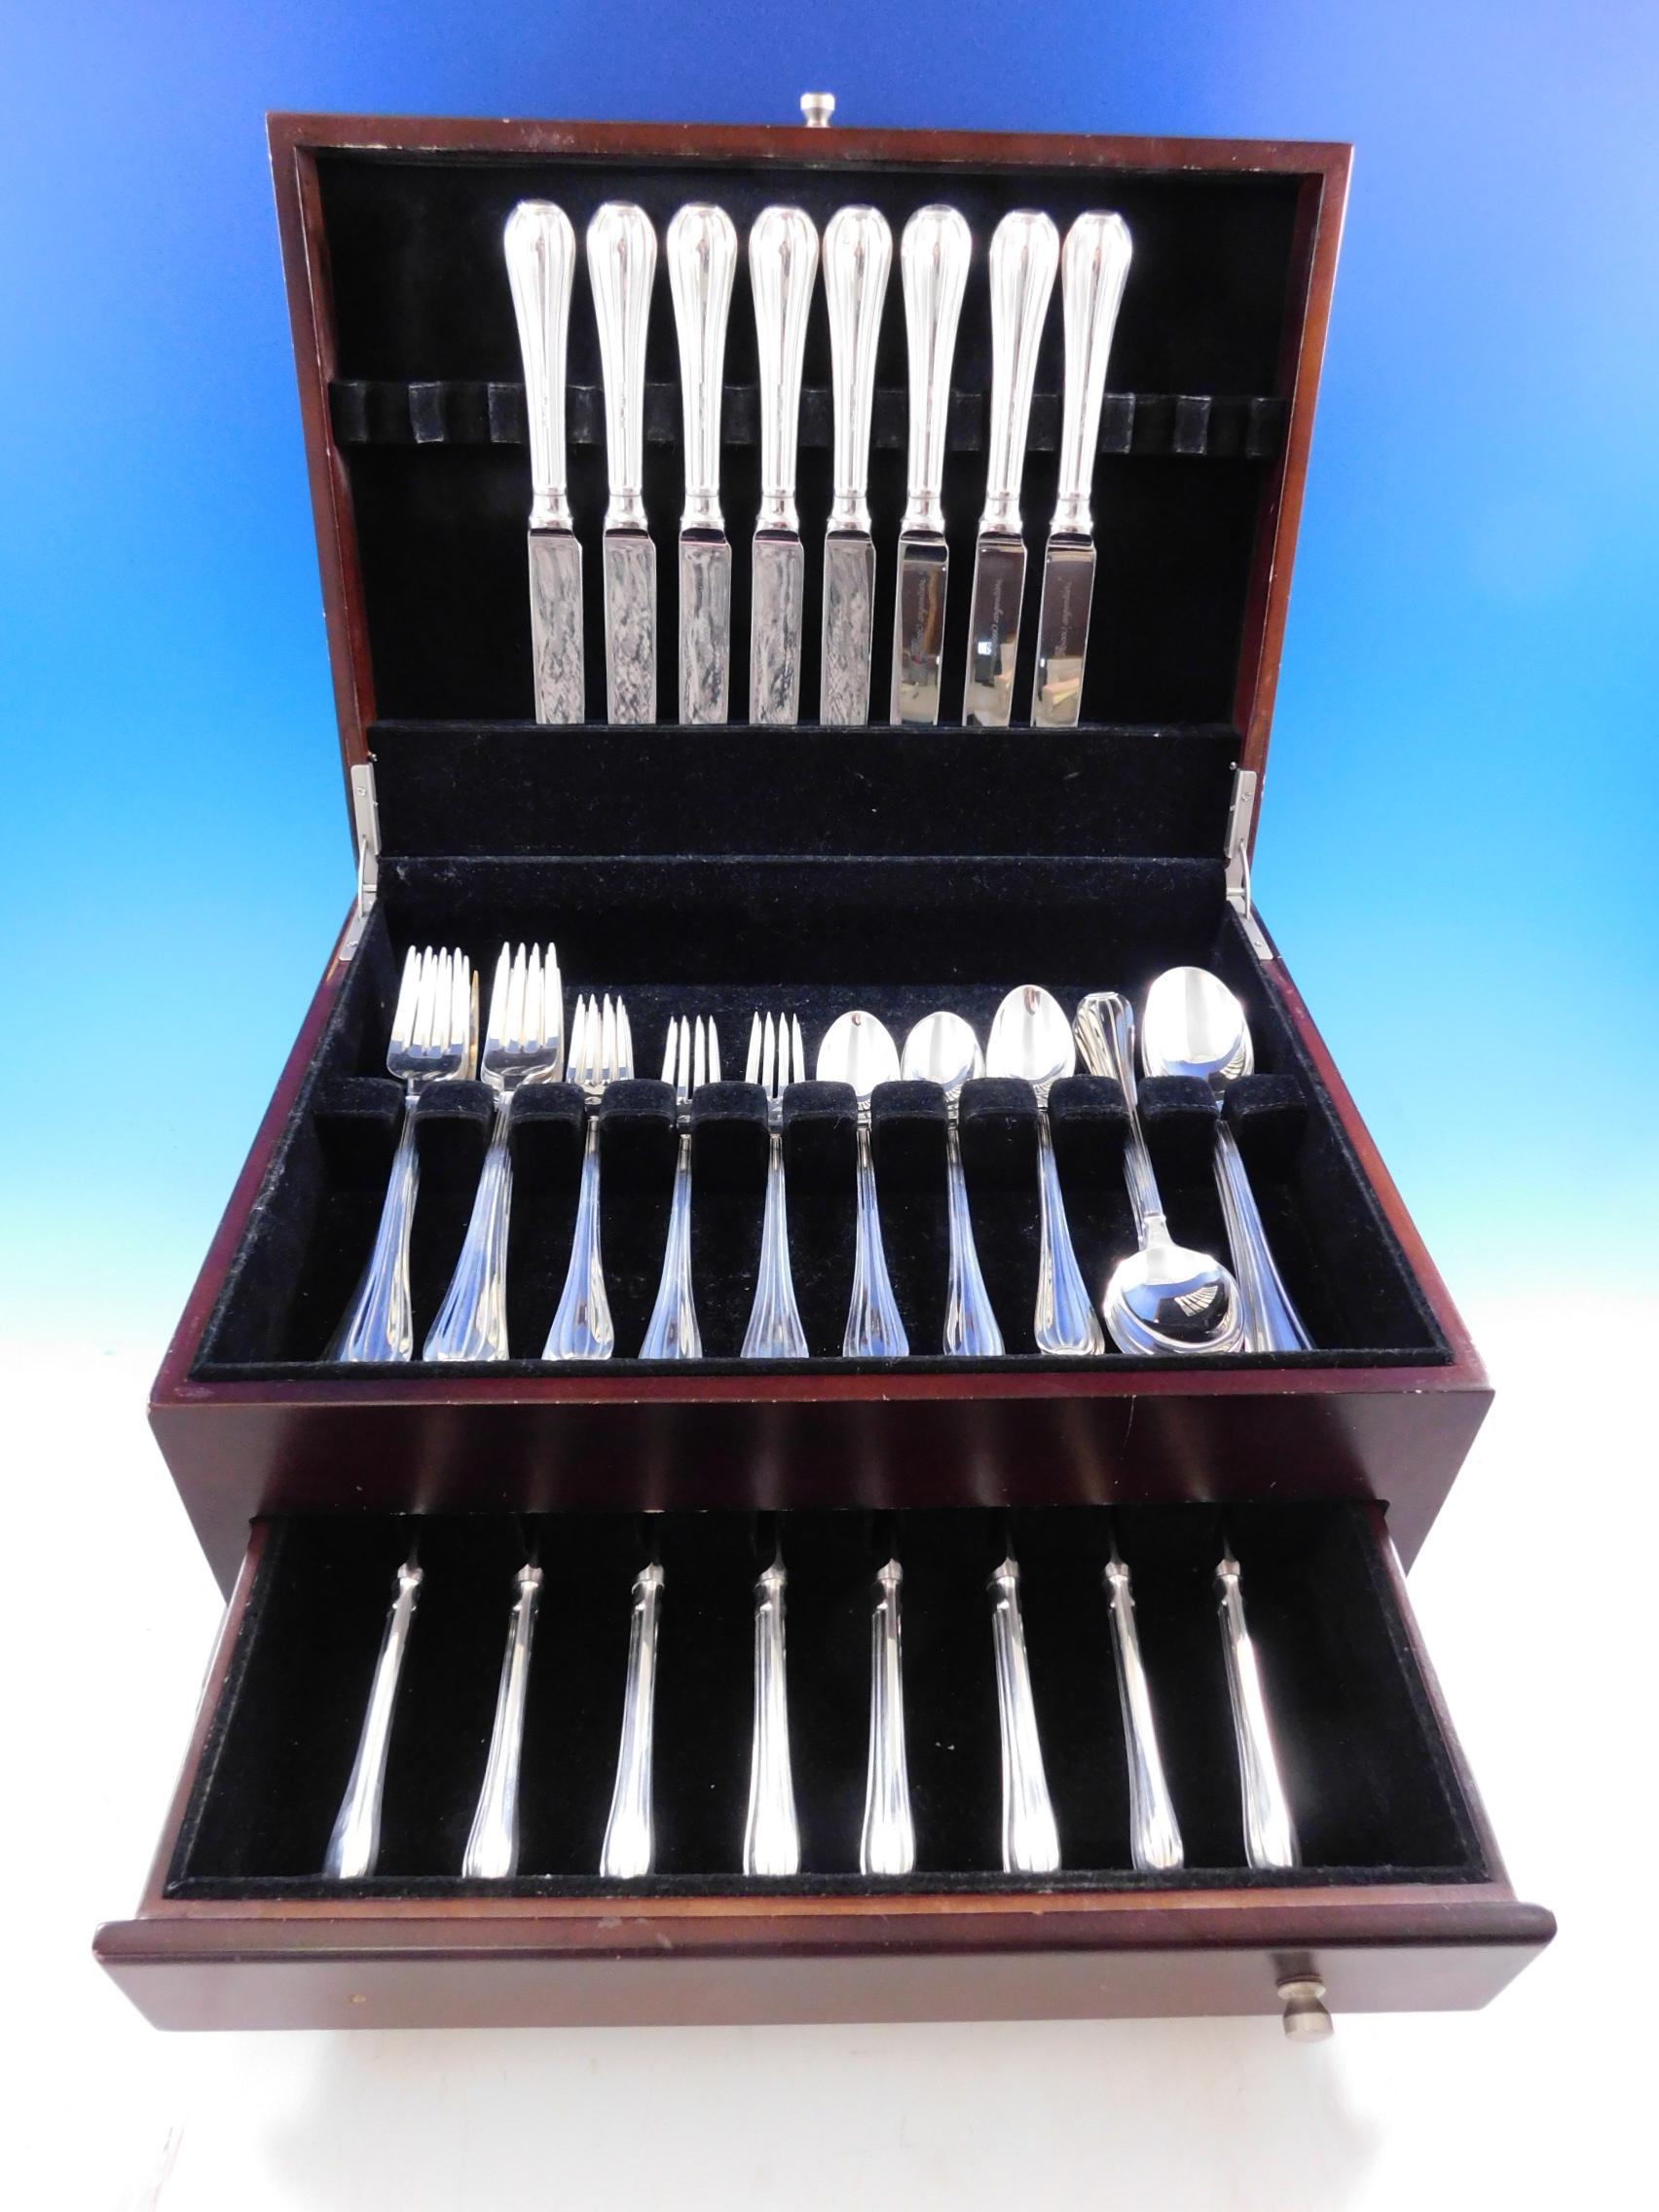 Gorgeous Meridiani by Ricci 925 (Italy) sterling silver flatware dinner set - 48 pieces. The pieces are large and impressive. This set includes:

8 dinner knives, 9 1/2